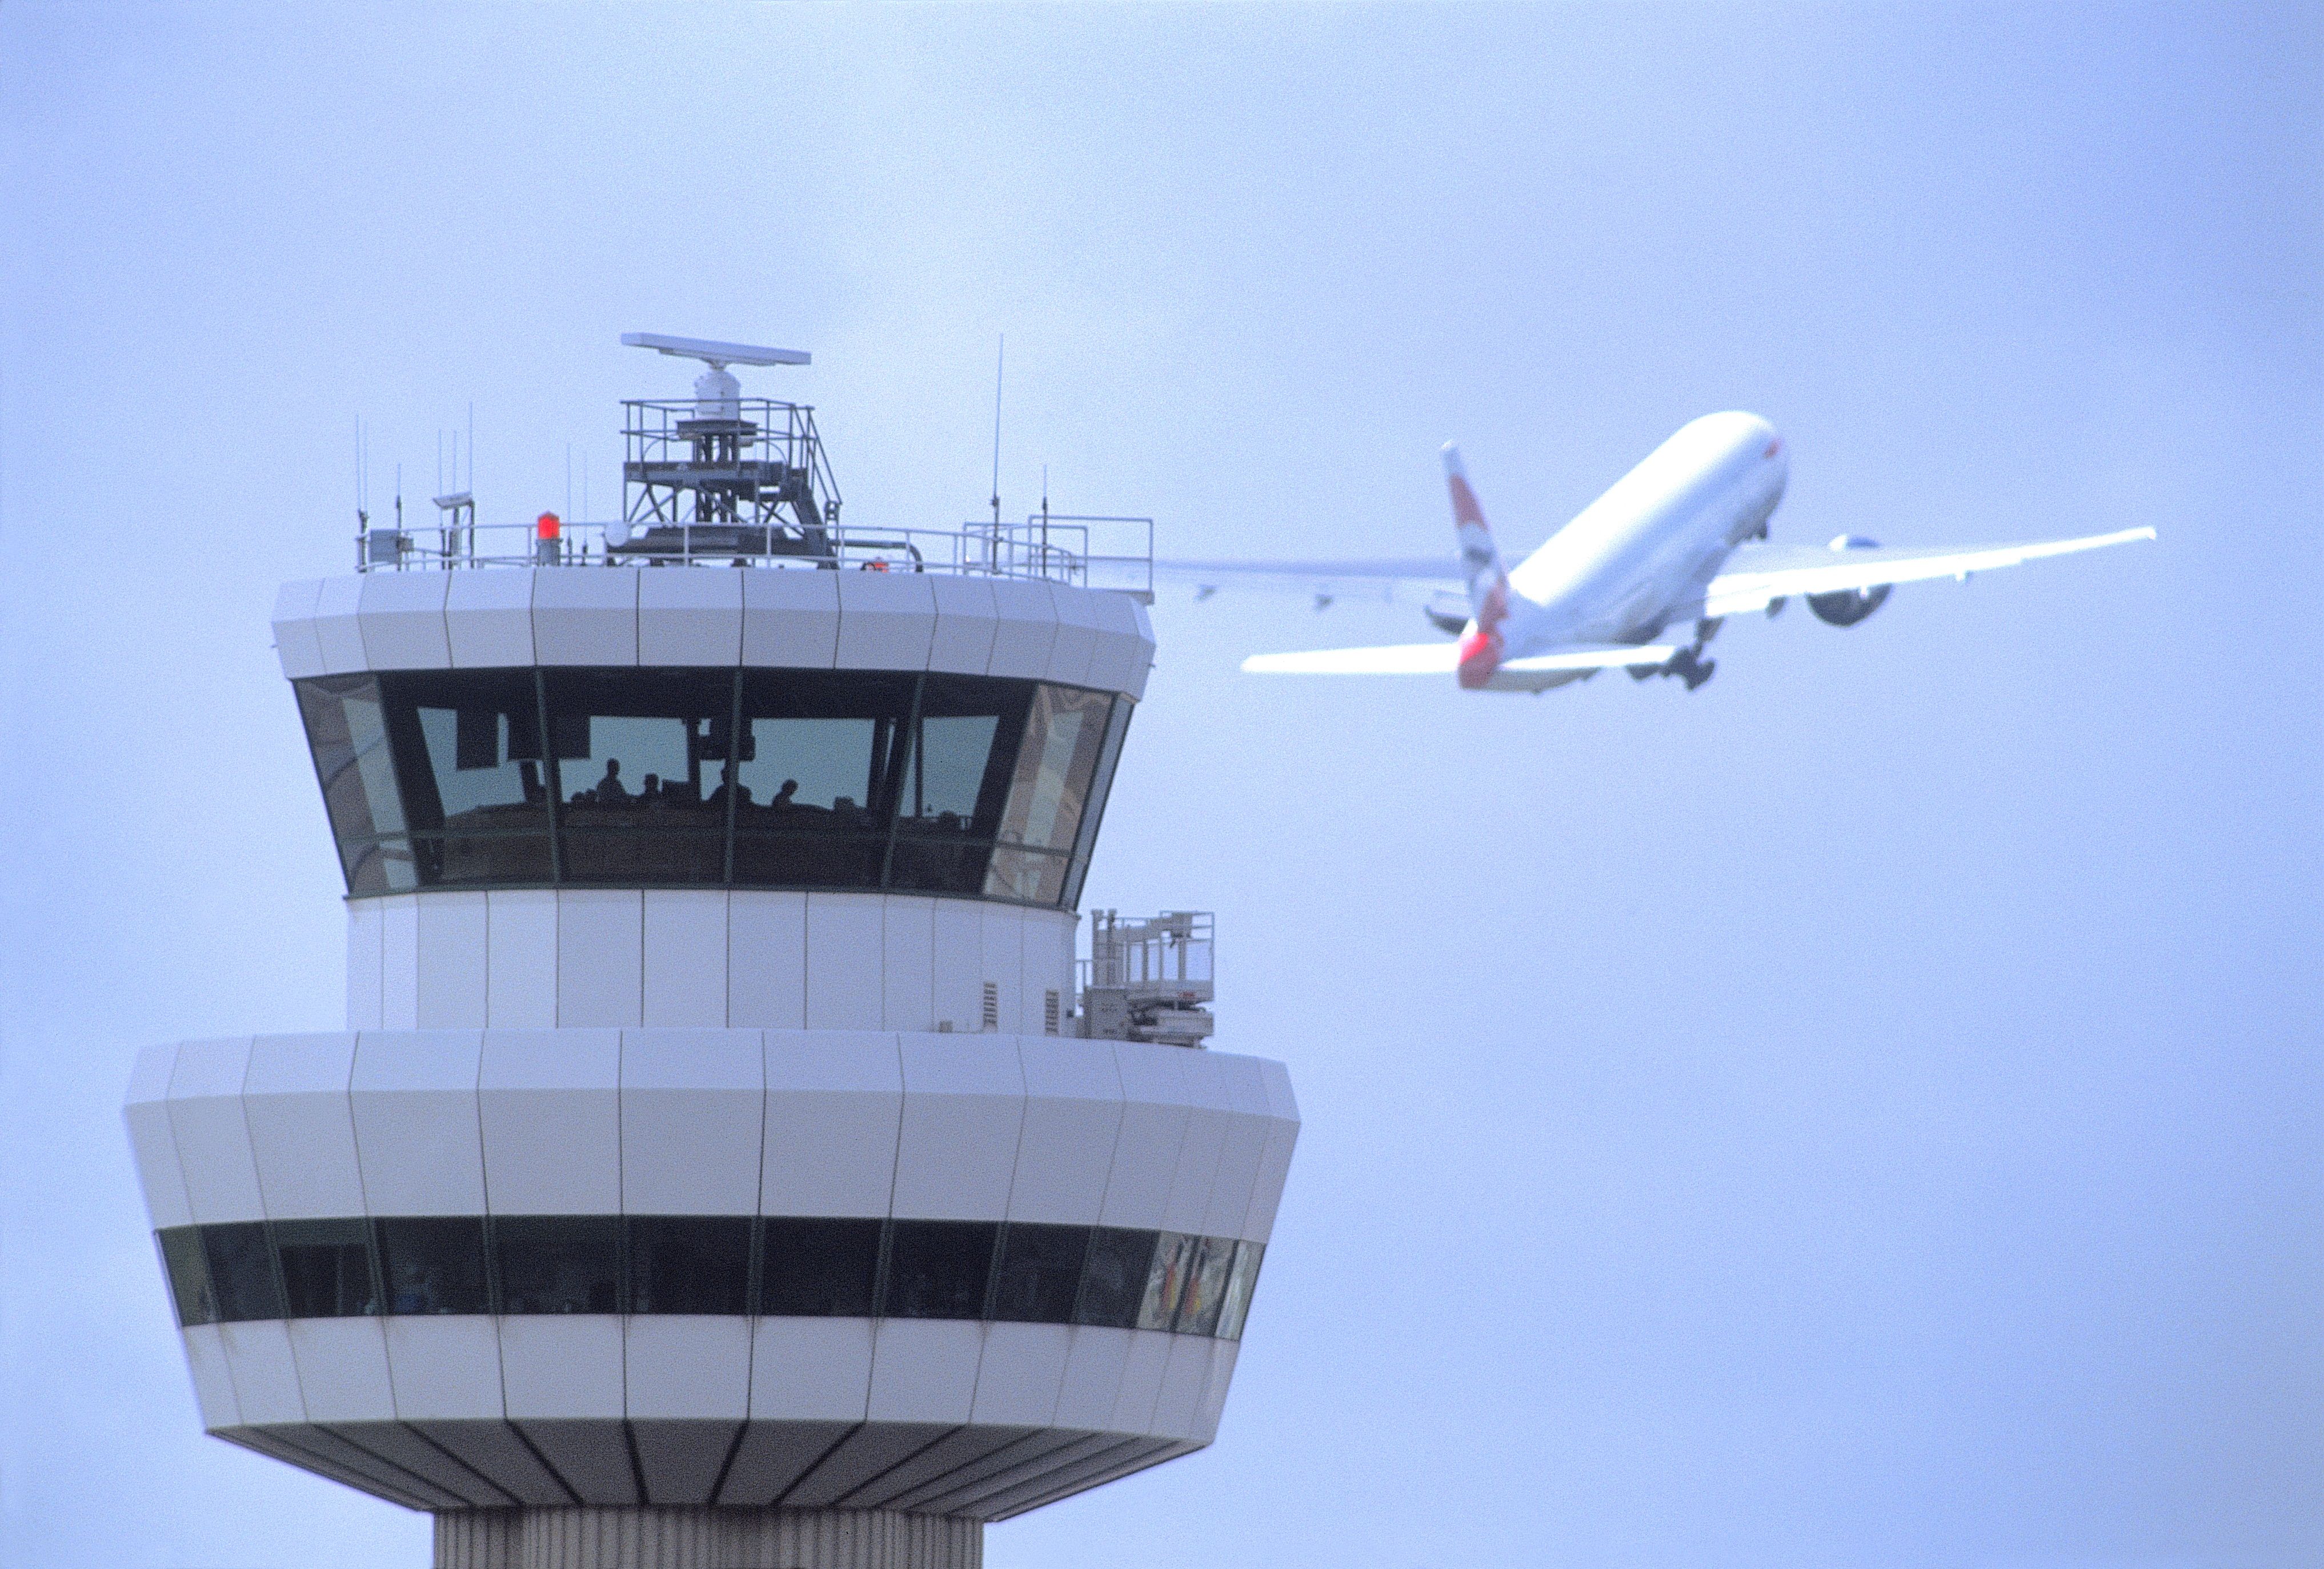 An aircraft takes off in front of the control tower at London Gatwick Airport